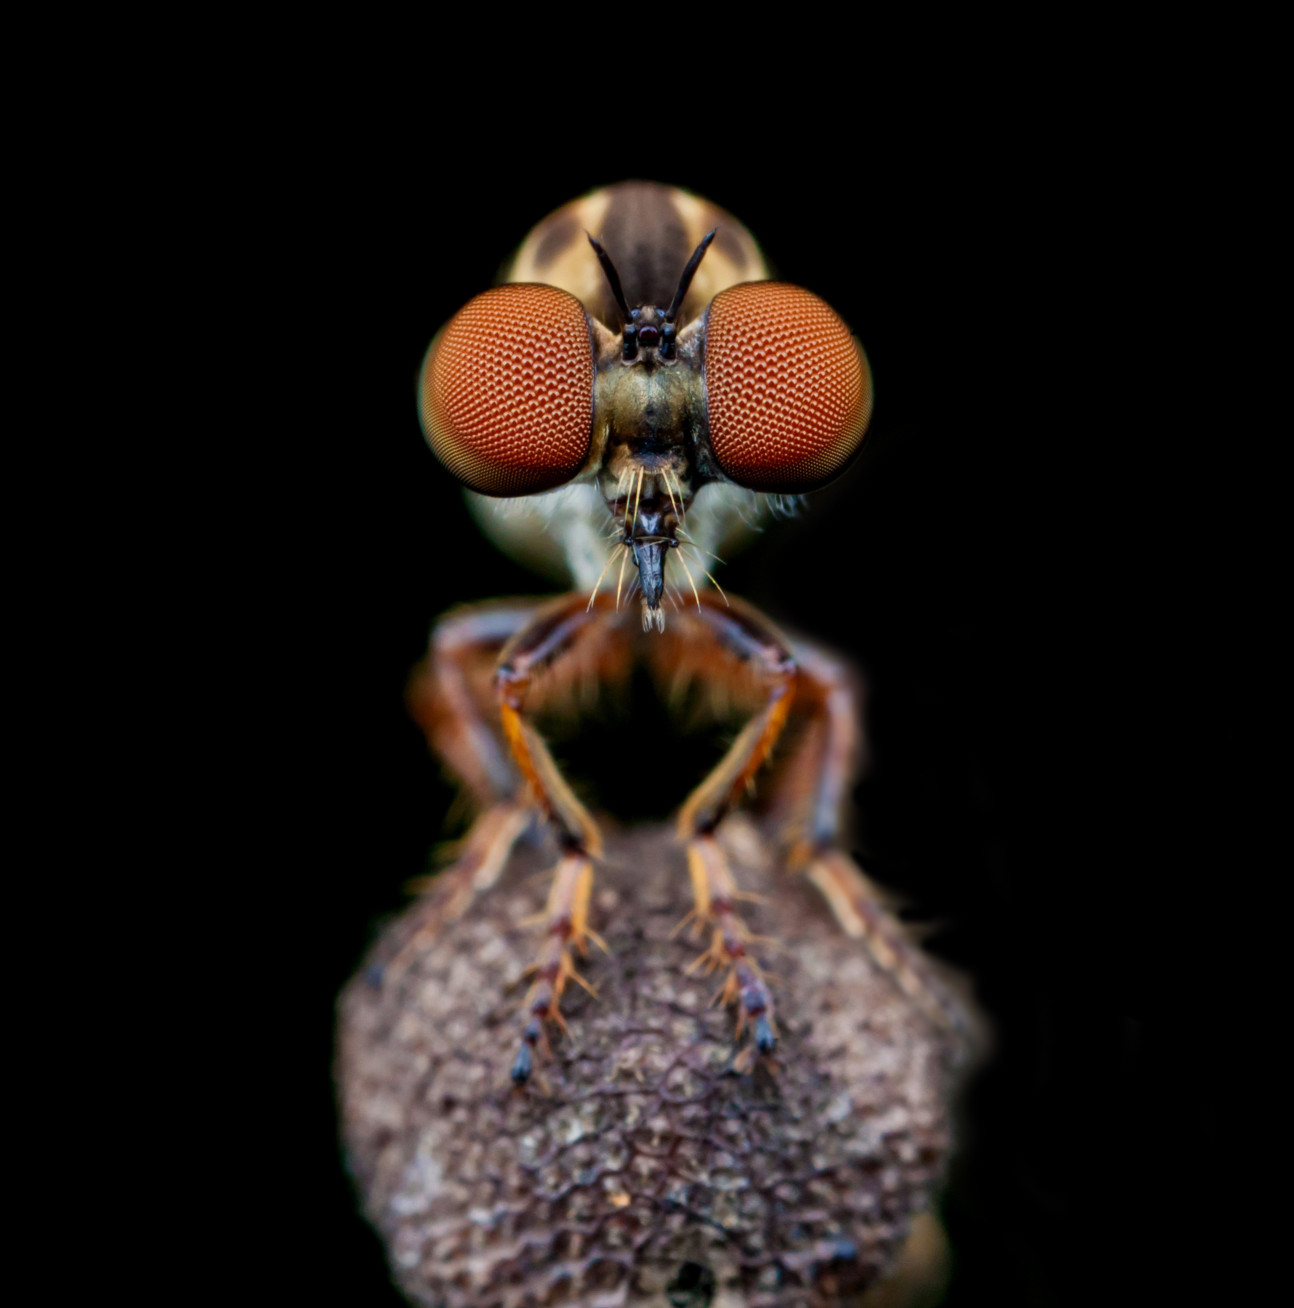 A robber fly up close